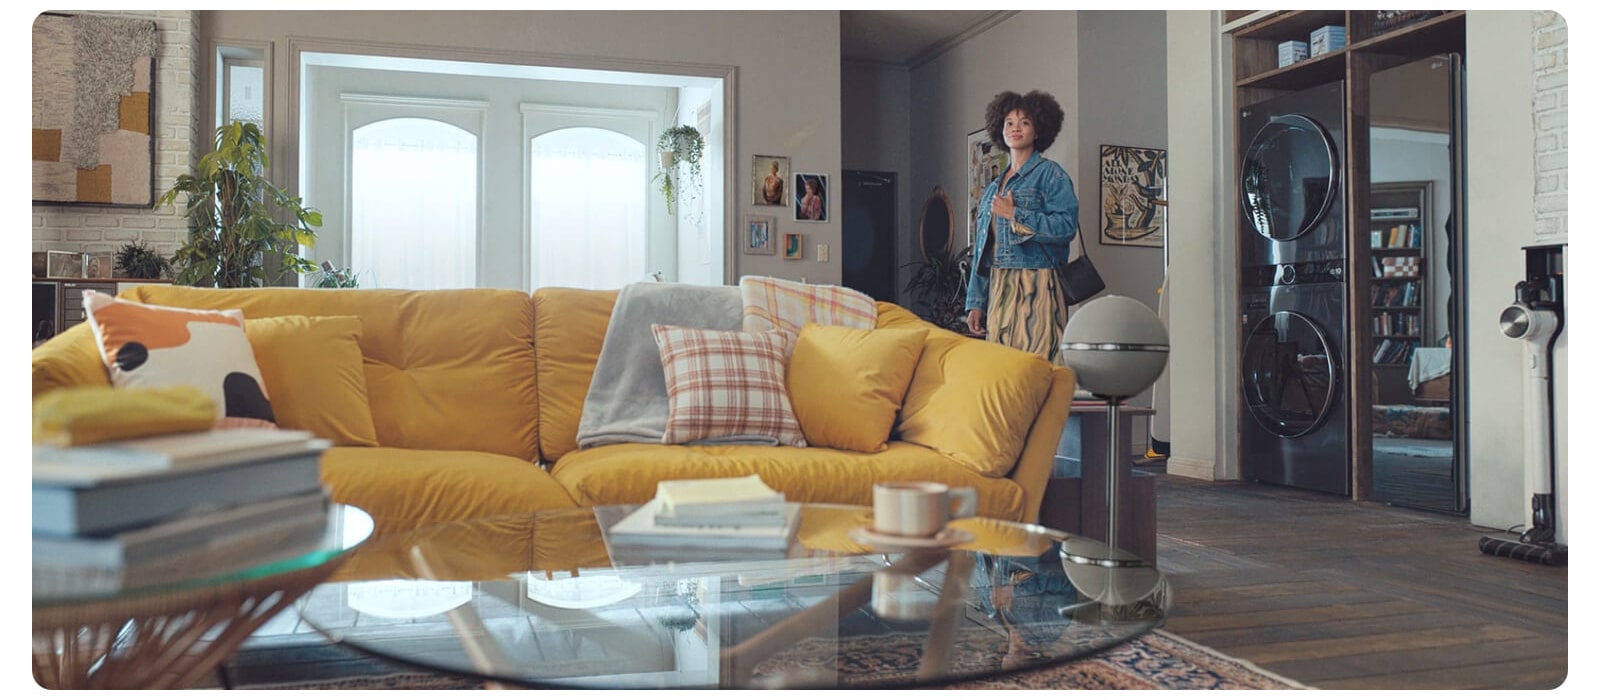 Woman standing in the living room satisfied with a healthy environment